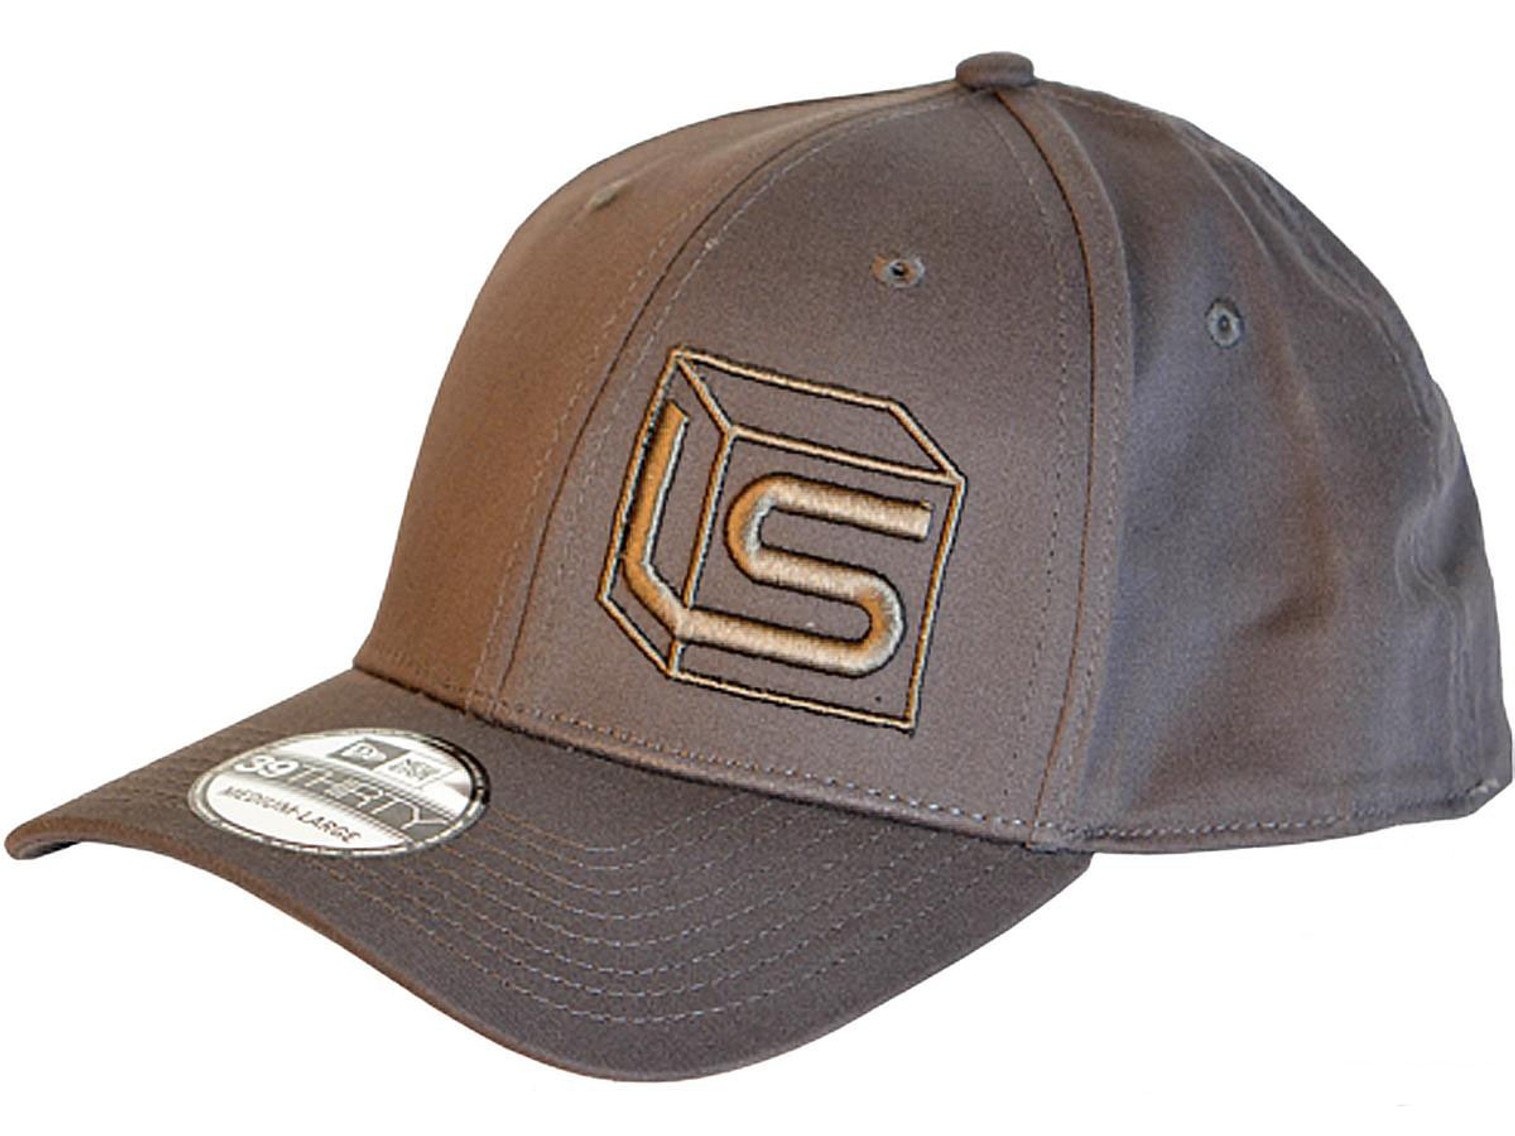 Salient Arms / New Era 39Thirty Flex Hat w/ Embroidered Salient Logo (Color: Grey)